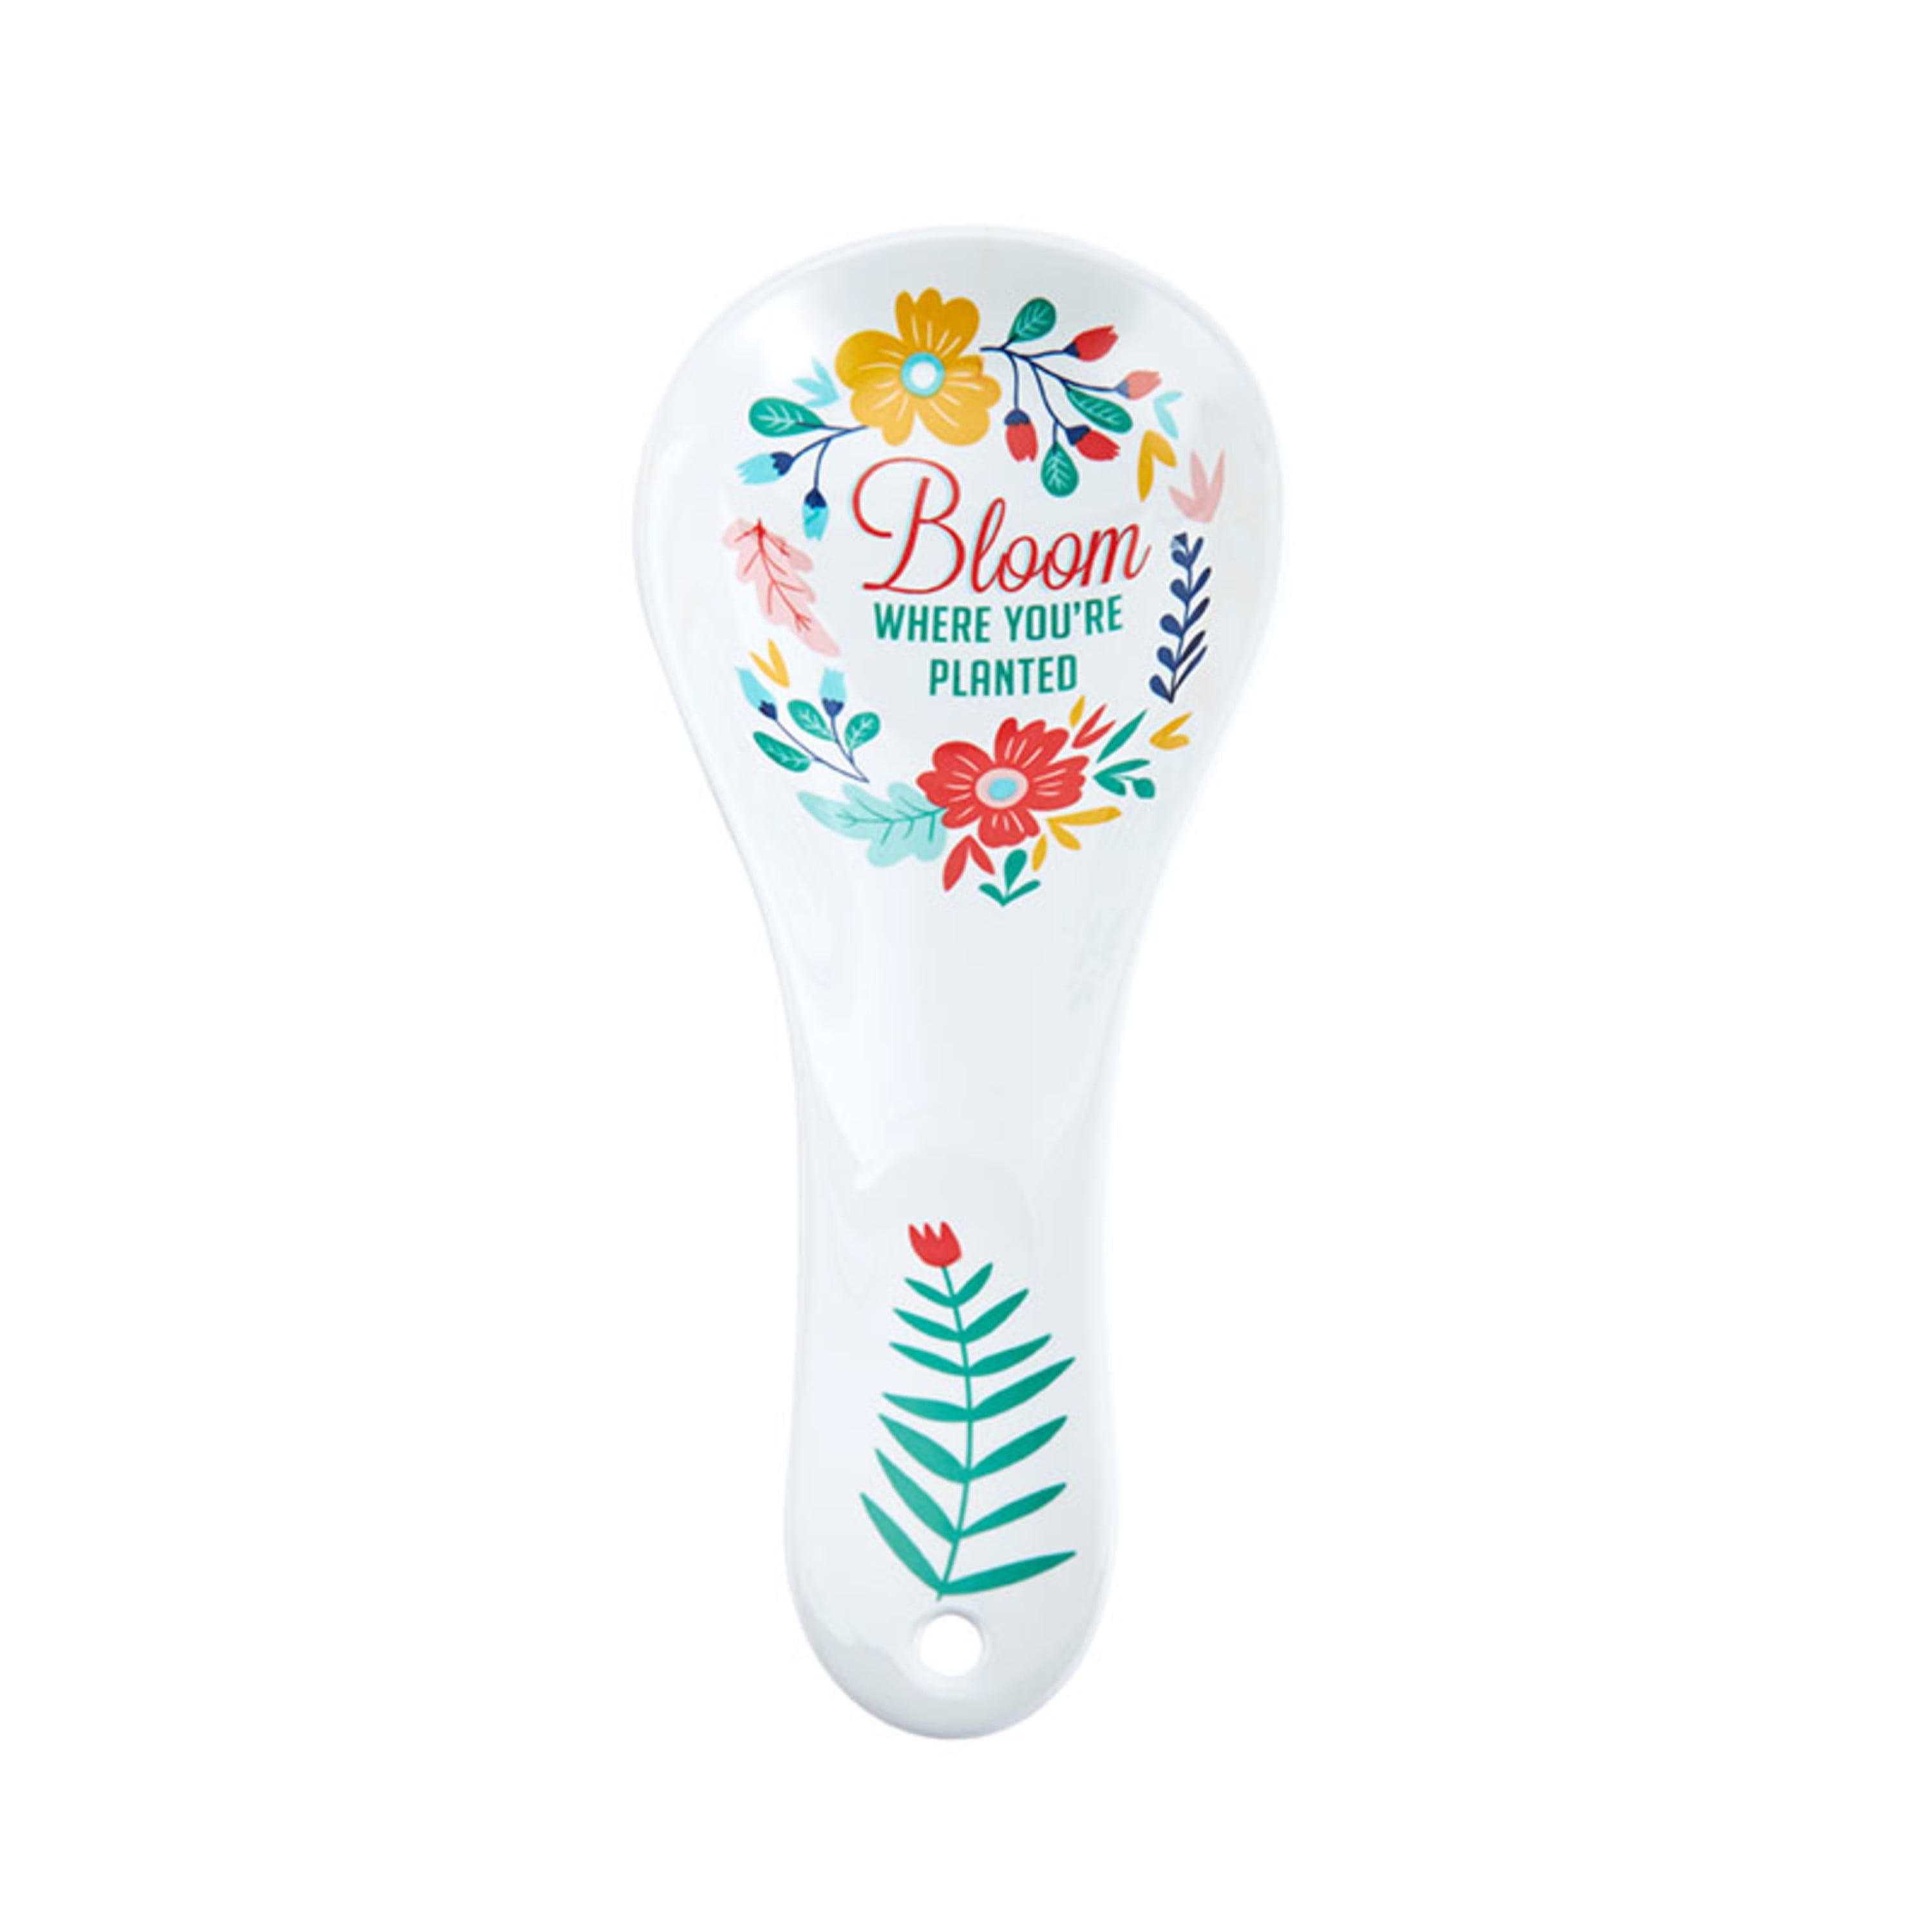 Farberware Professional Melamine Spoon Rest, Comes in Different Patterns in  Store, 1 Spoon Rest 